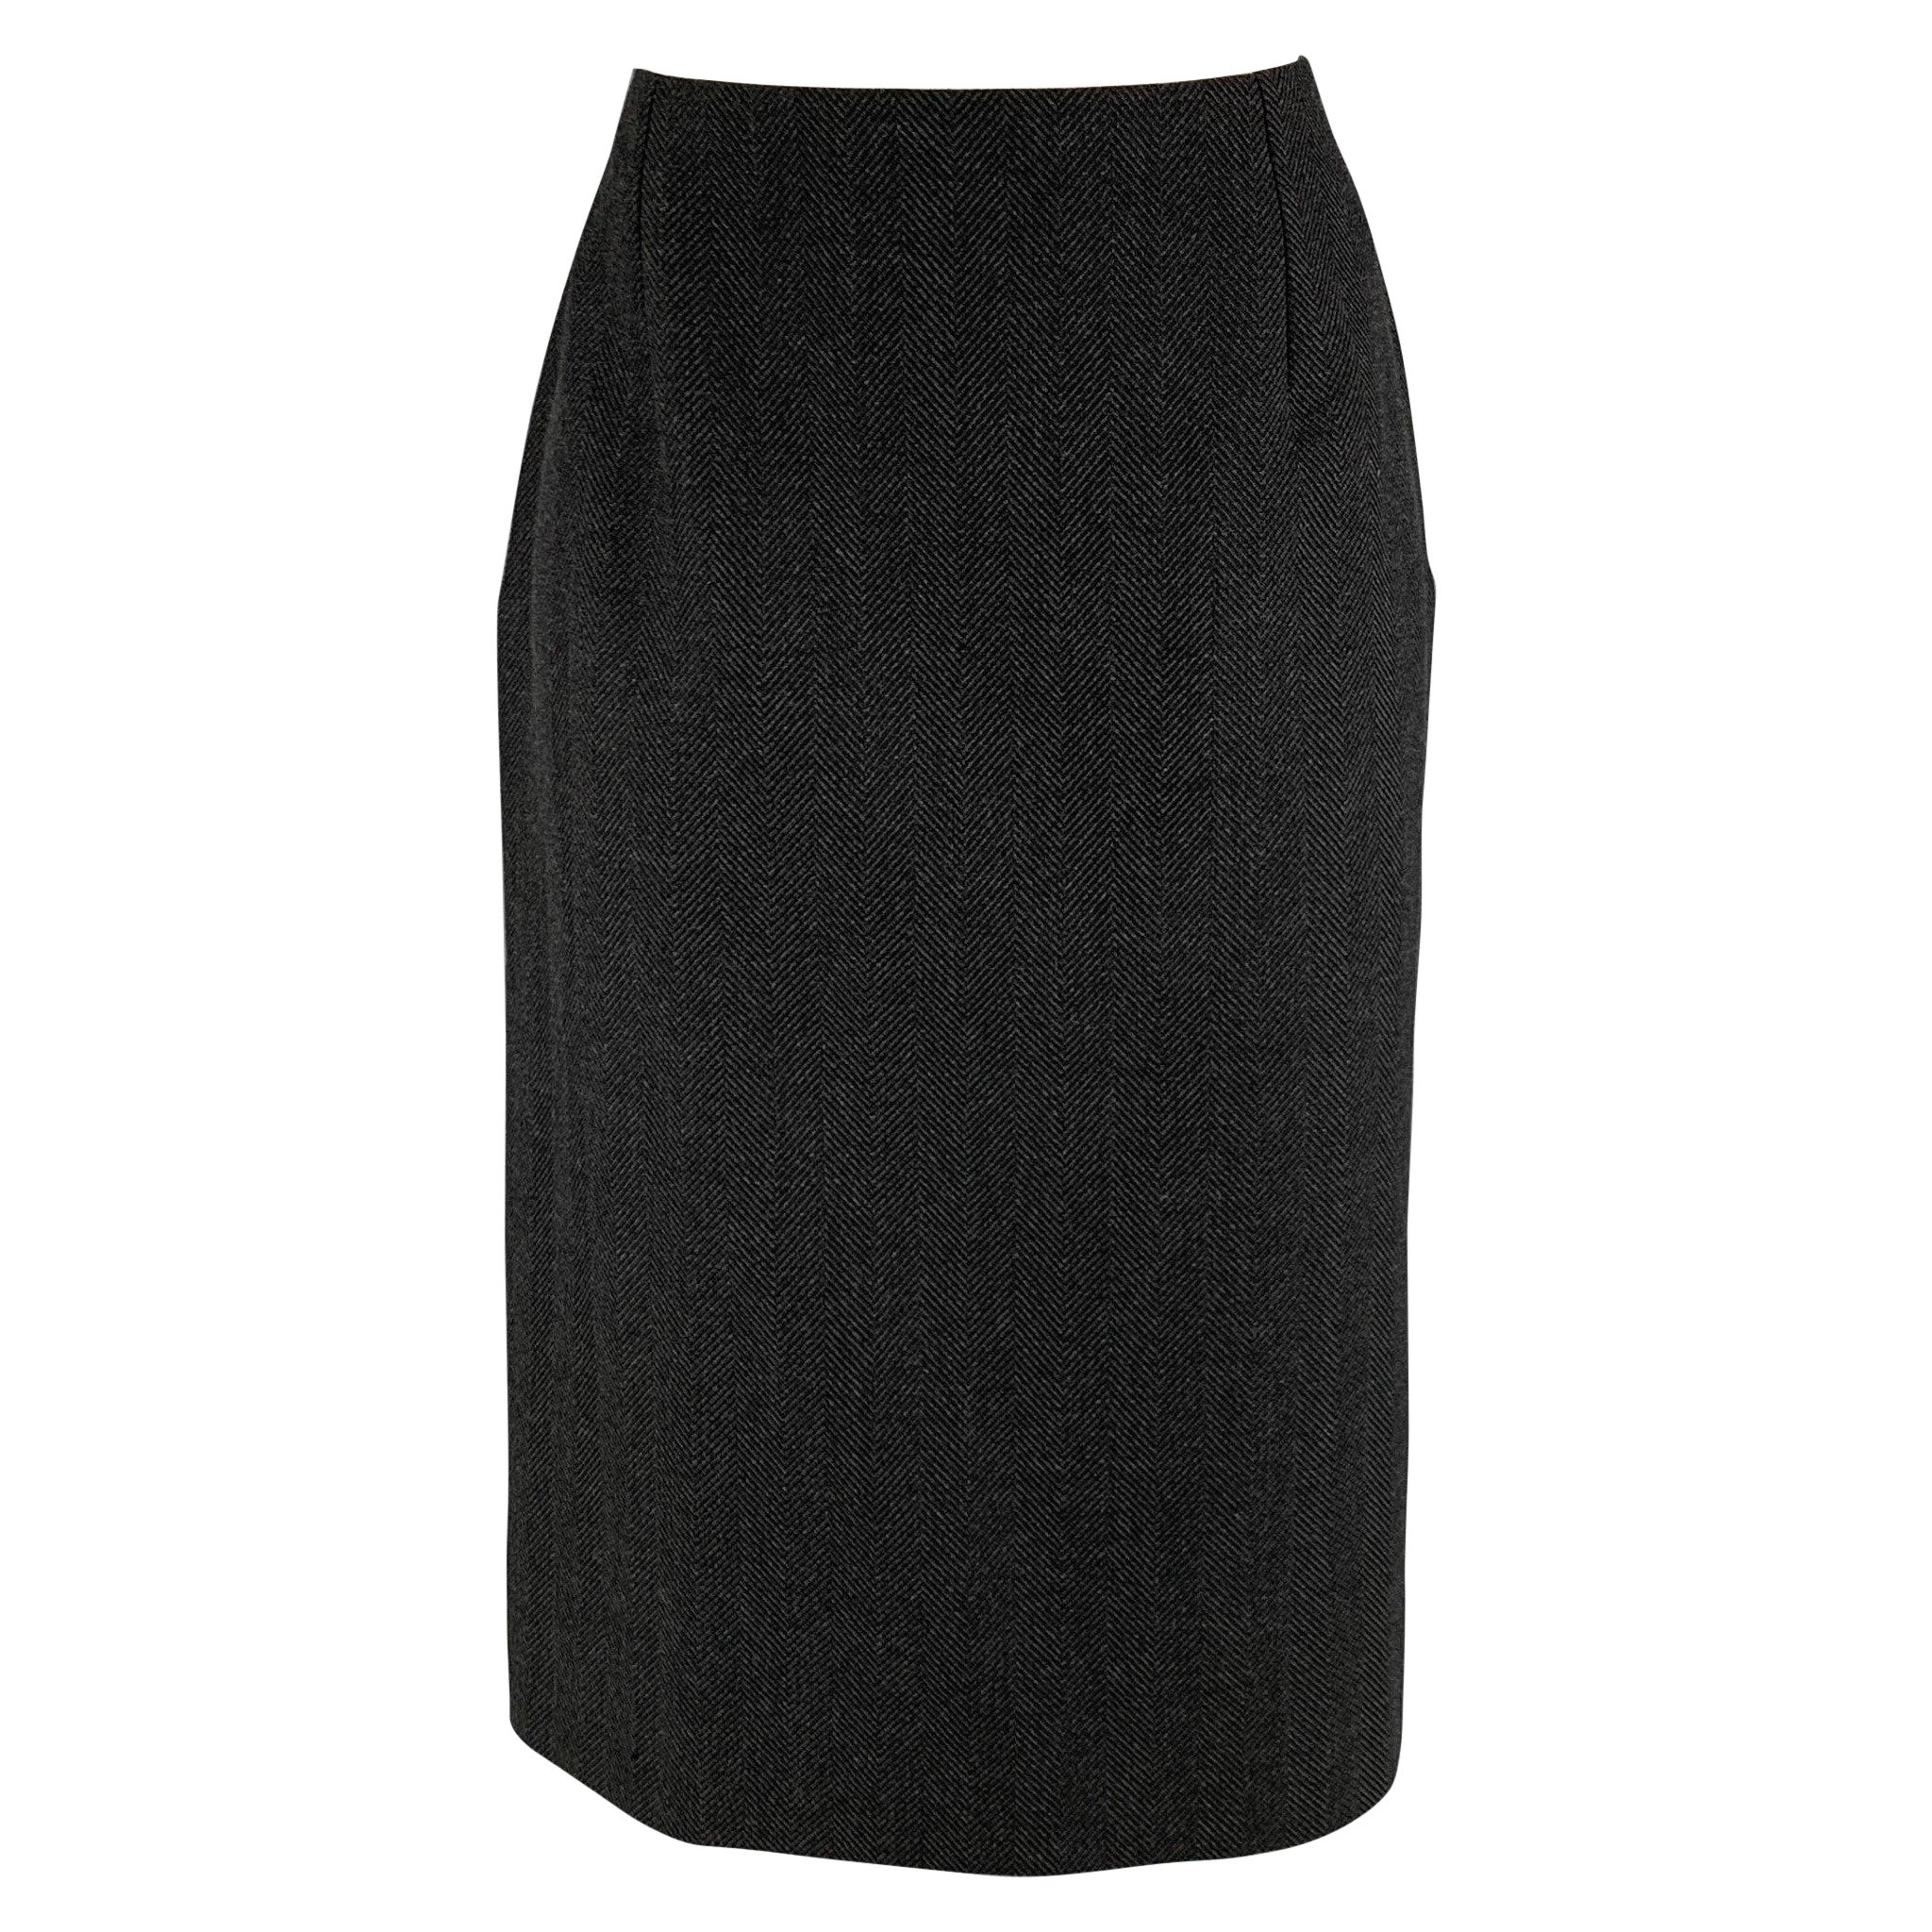 LOUIS VUITTON Size 8 Black Wool Polyester Herringbone Pencil Mid-Calf Skirt For Sale